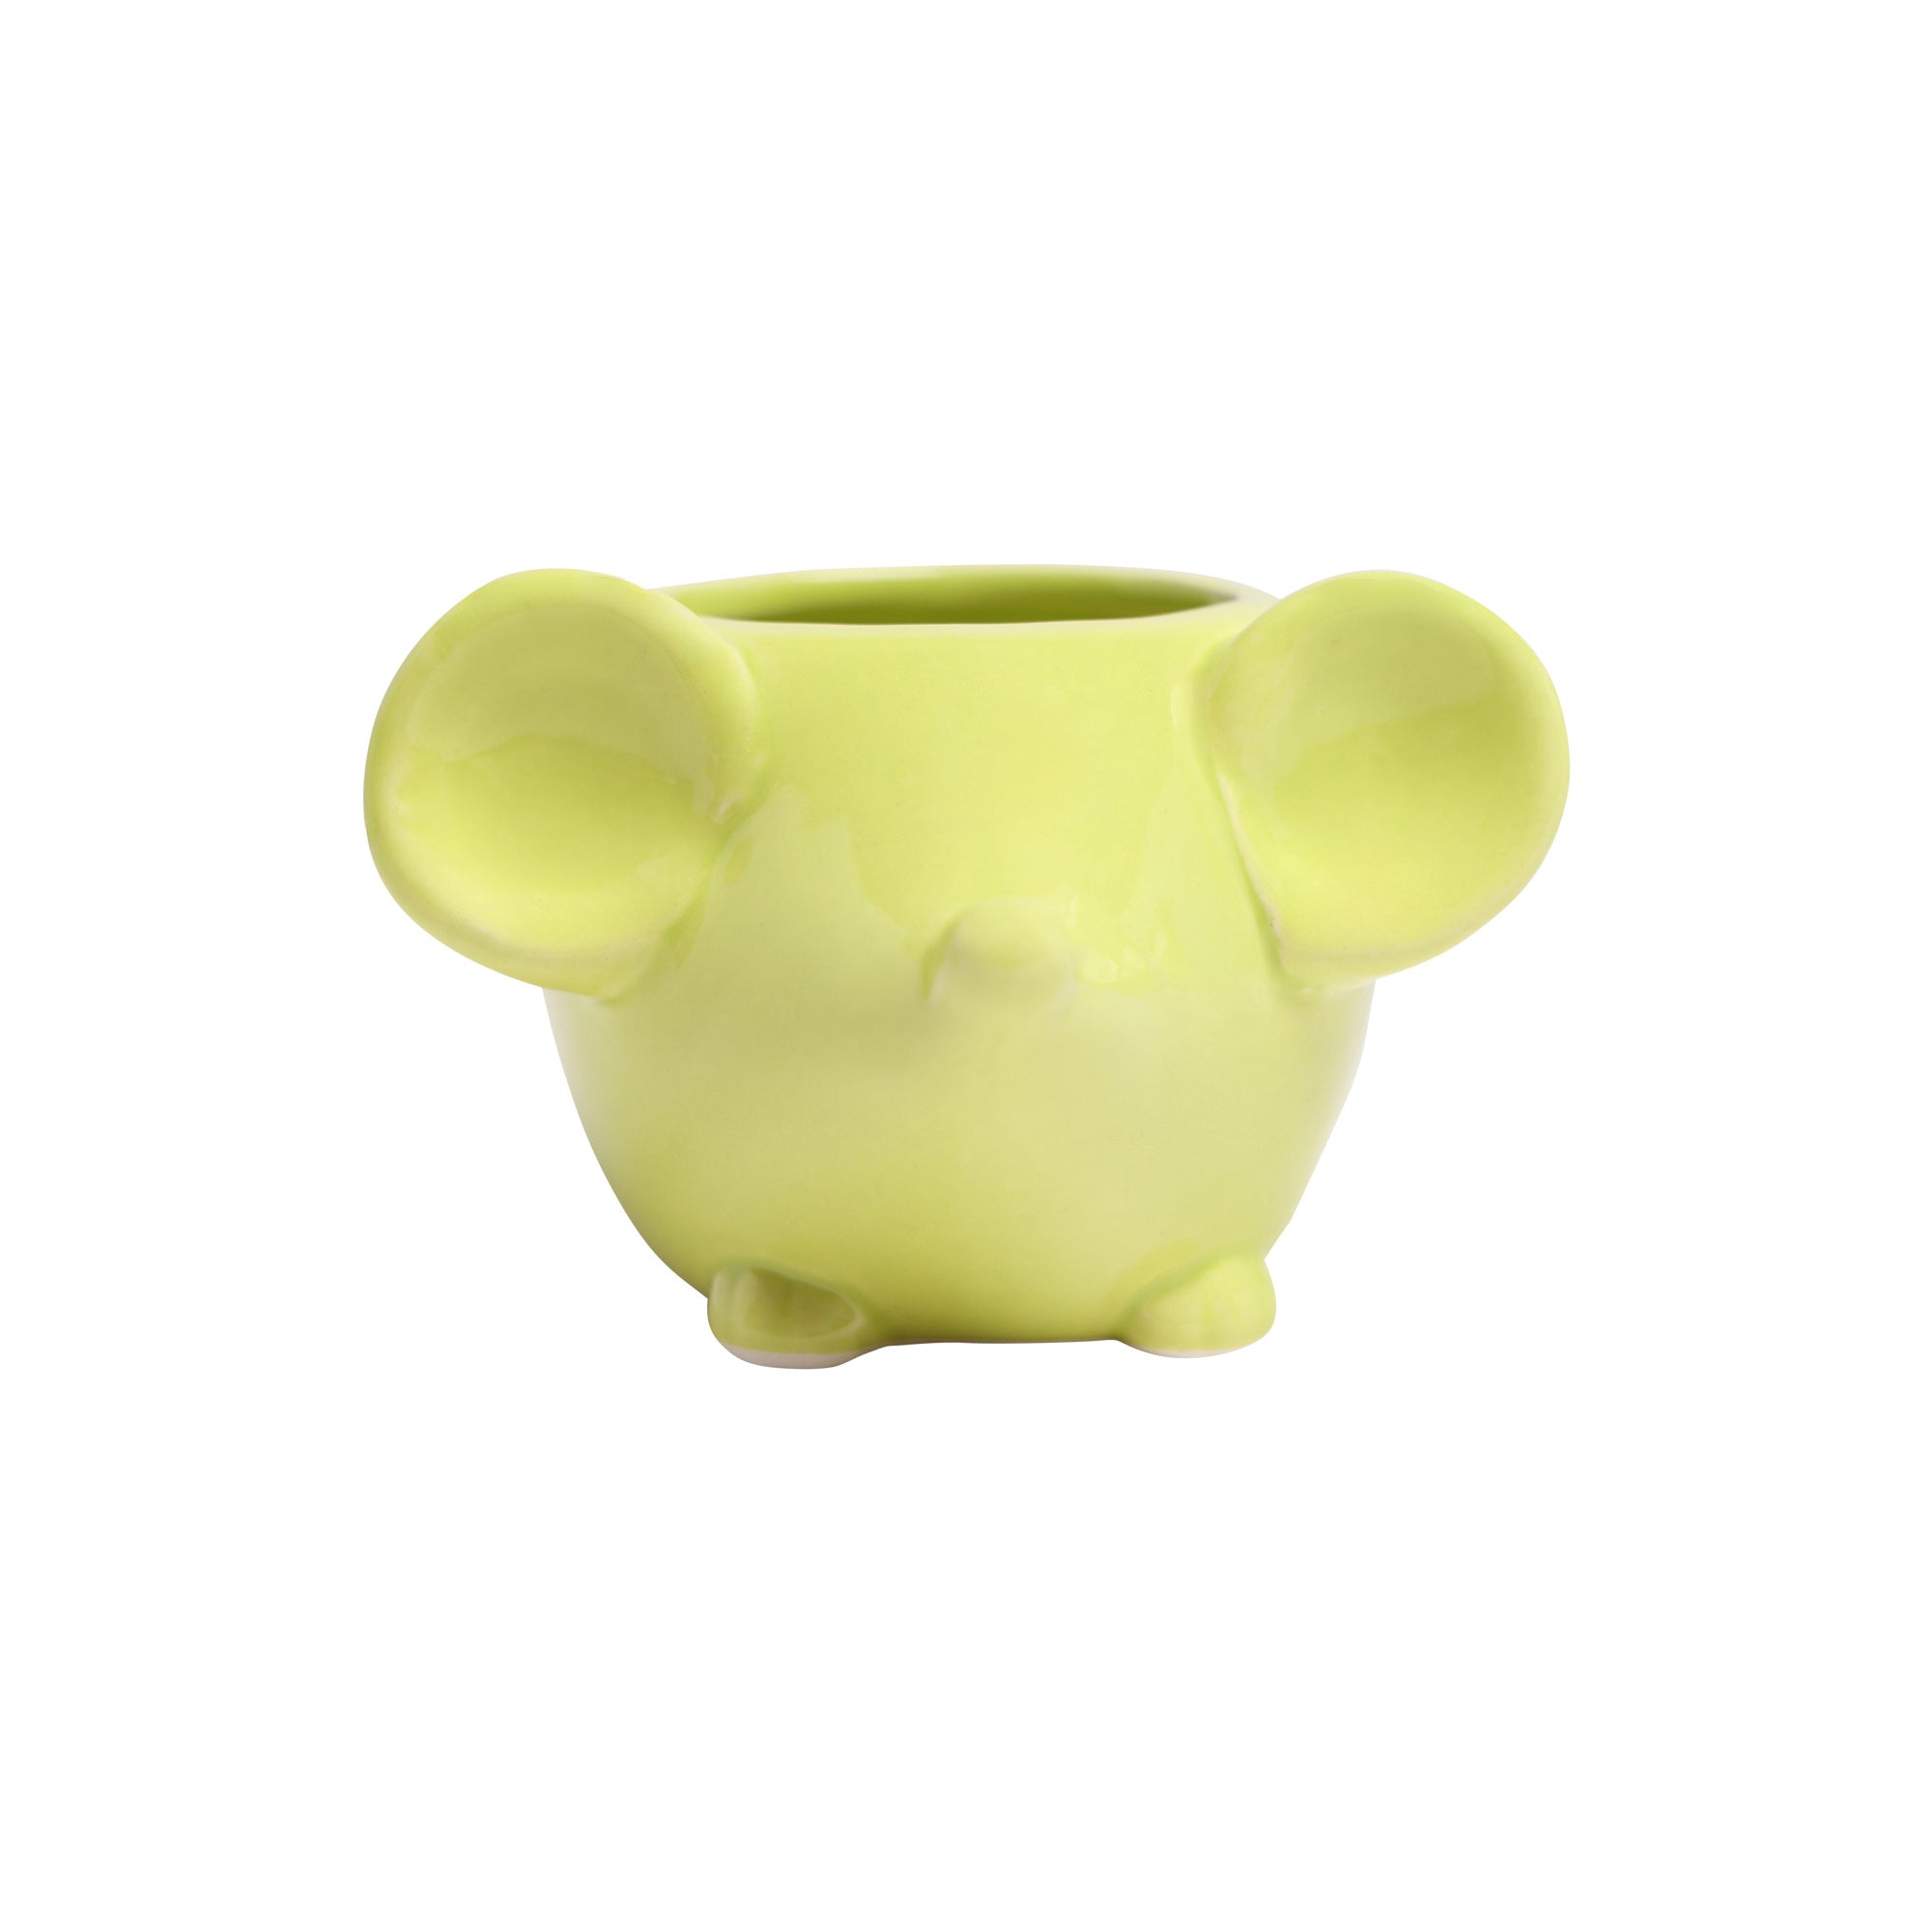 Sentence with replaced product: A Mouse Ceramic Indoor Plant Pot For Succulents shaped like a frog, viewed from a frontal angle, isolated against a white background. Brand: Chive Studio 2024.